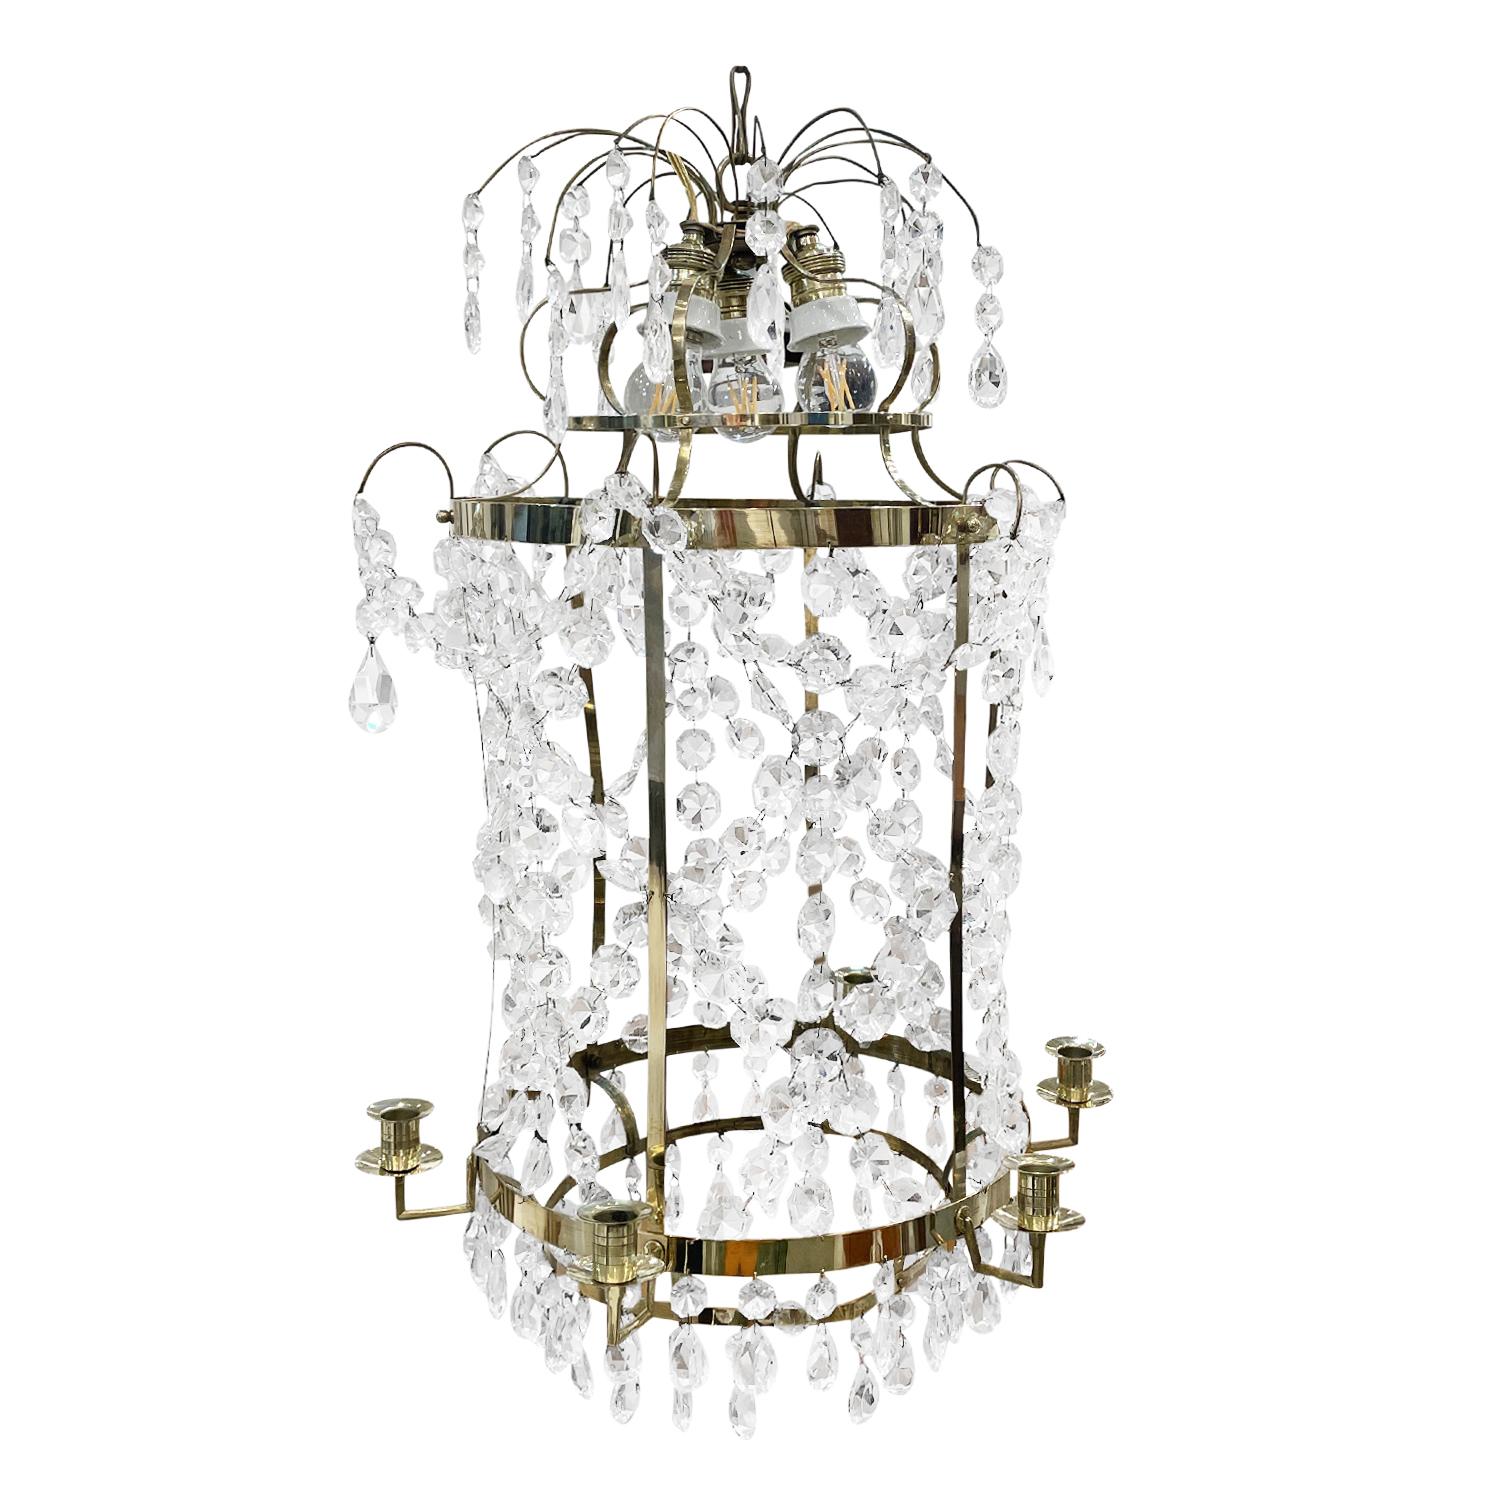 A round, antique French chandelier, pendant made of hand crafted polished brass, in good condition. The hand blown cut crystal prisms are attached, halted to the ceiling lamp brass frame, each of the glass pieces is draping, hanging featuring a